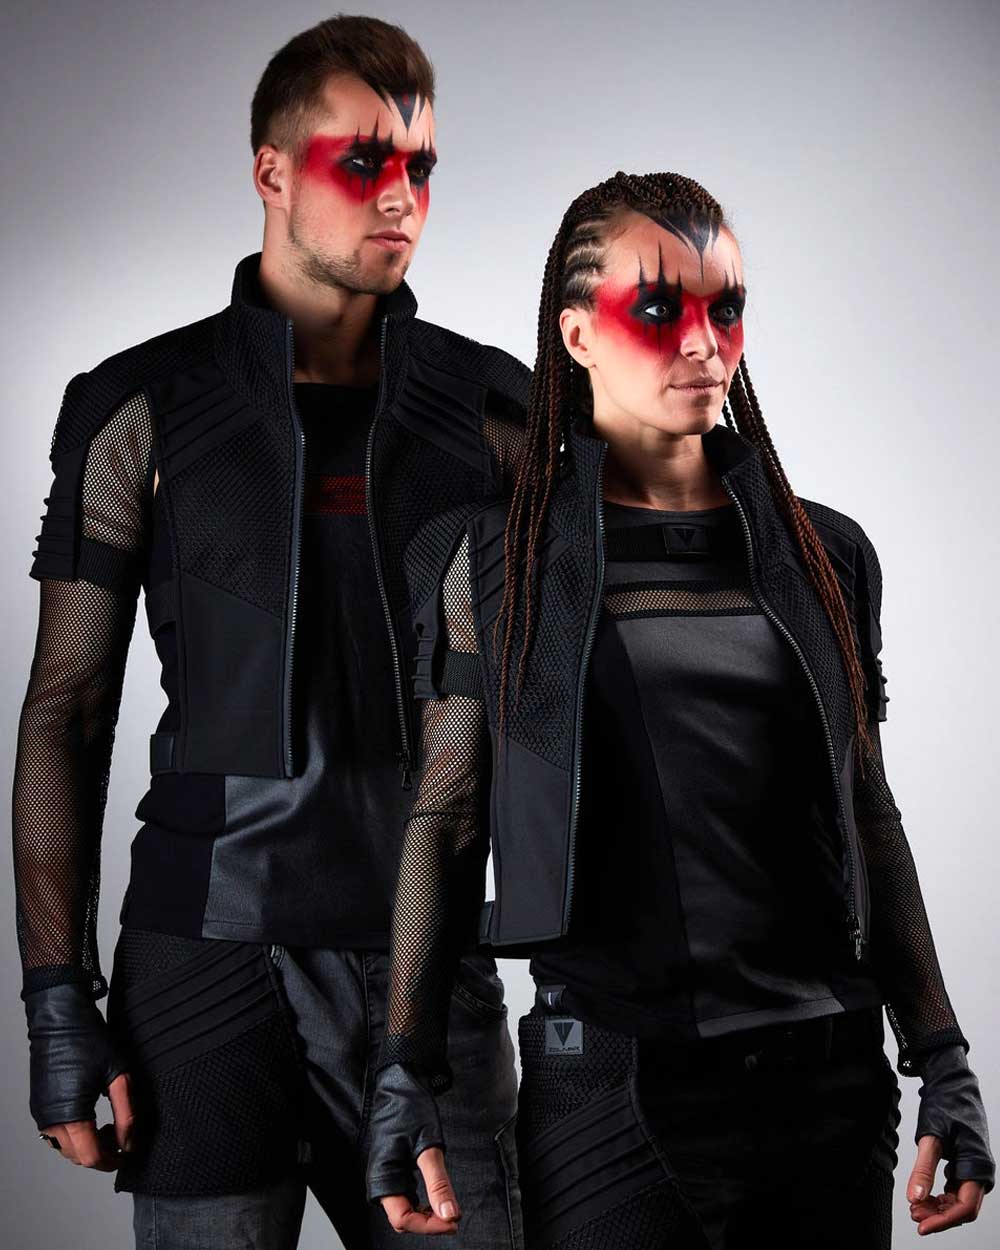 Top 14 Best Cyberpunk Clothing Brands And Online Stores (2022)